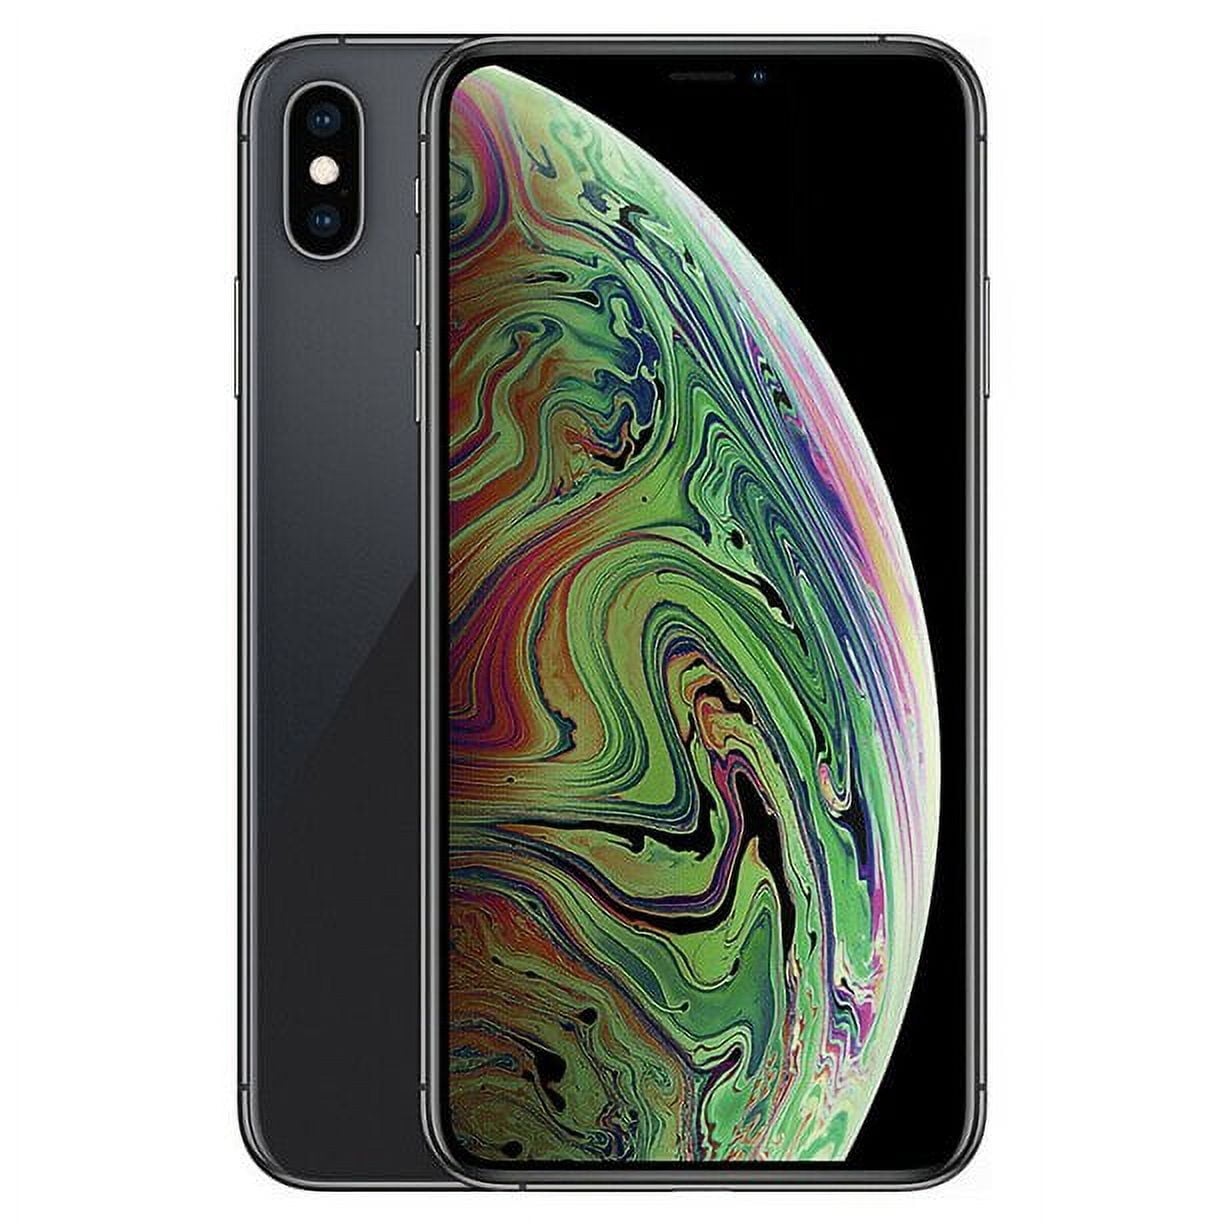 Apple iPhone XS 64gb 256GB 512gb All Colors - Factory Unlocked Smartphone - Very Good Condition, Gray